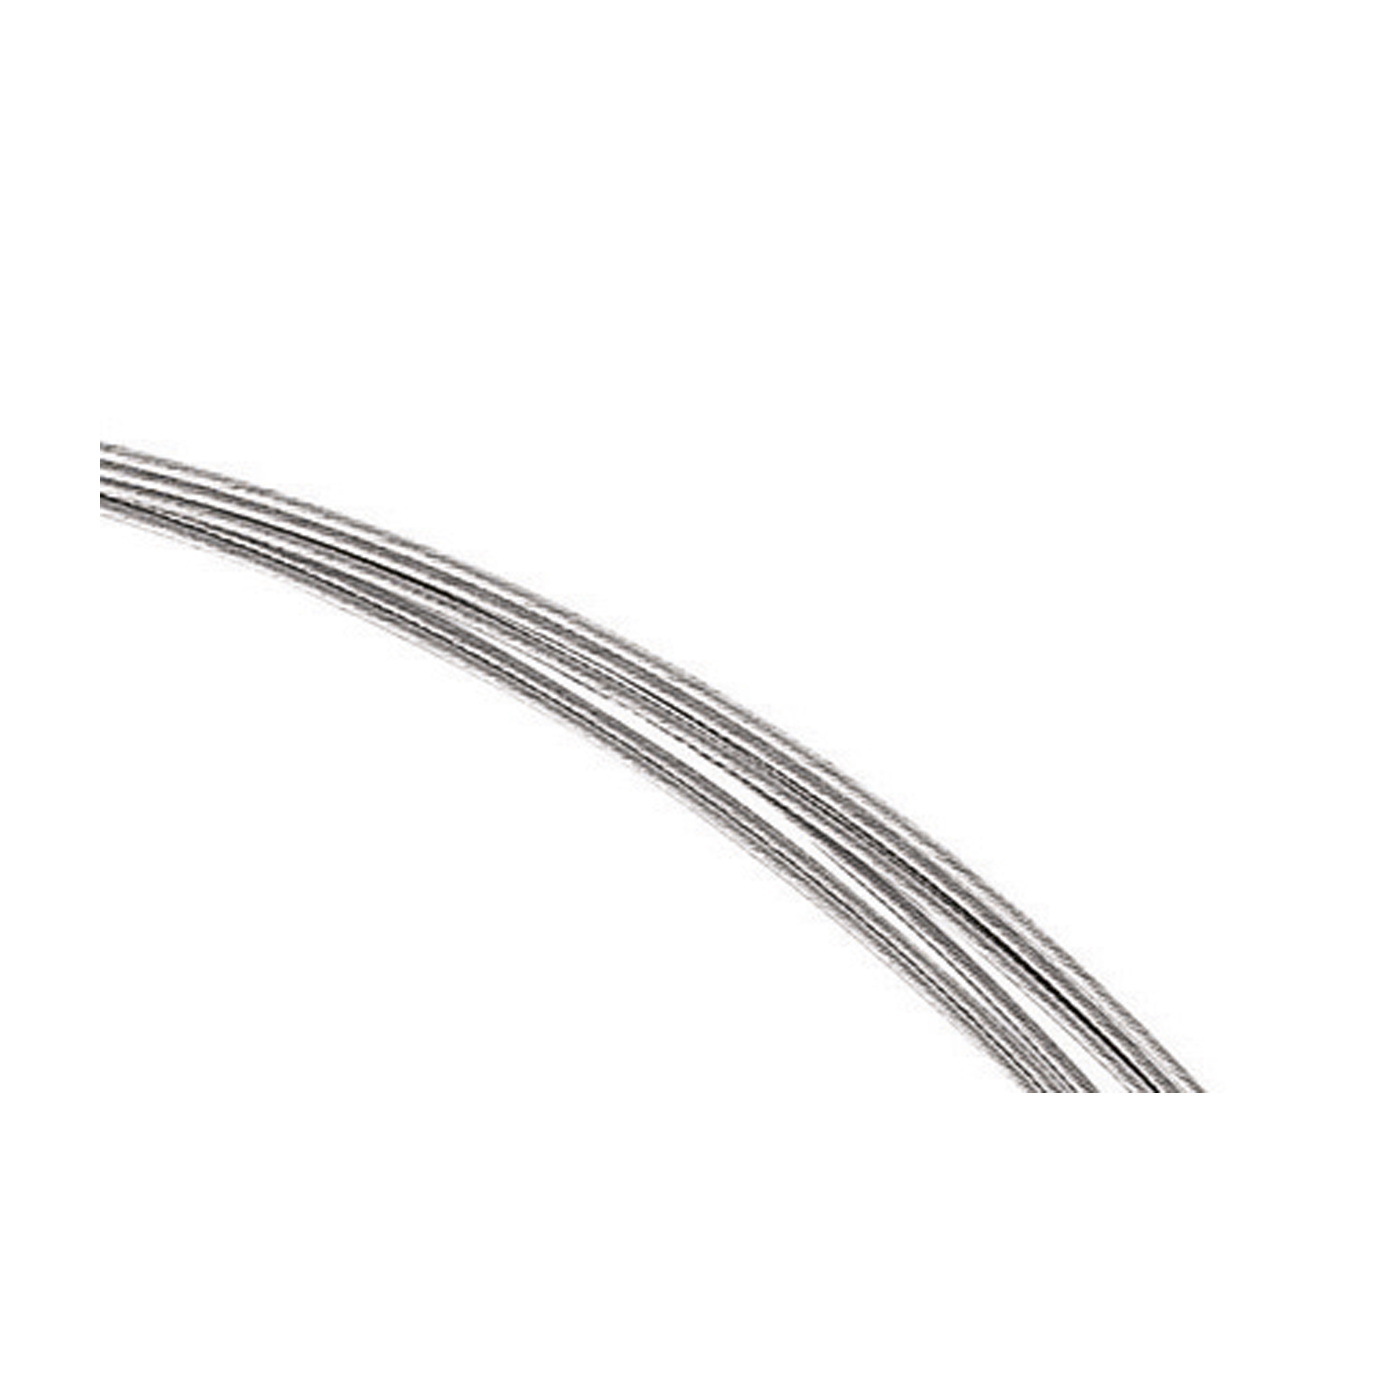 Steel Cable Neck Wire, 7-Strand, ø 0.3 mm, 42 cm - 1 piece